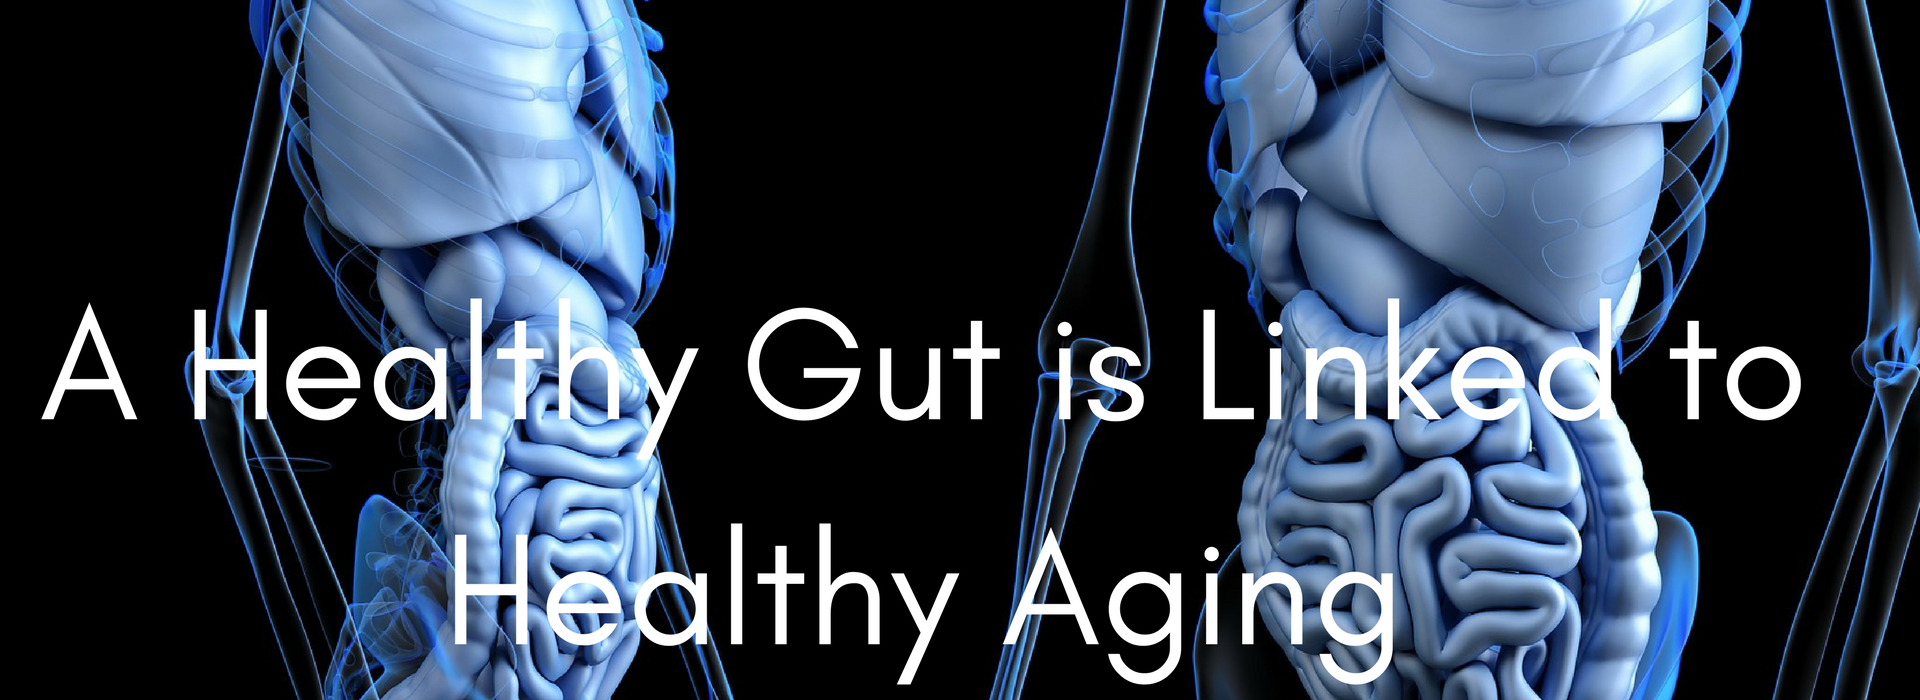 A Healthy Gut is Linked to Healthy Aging